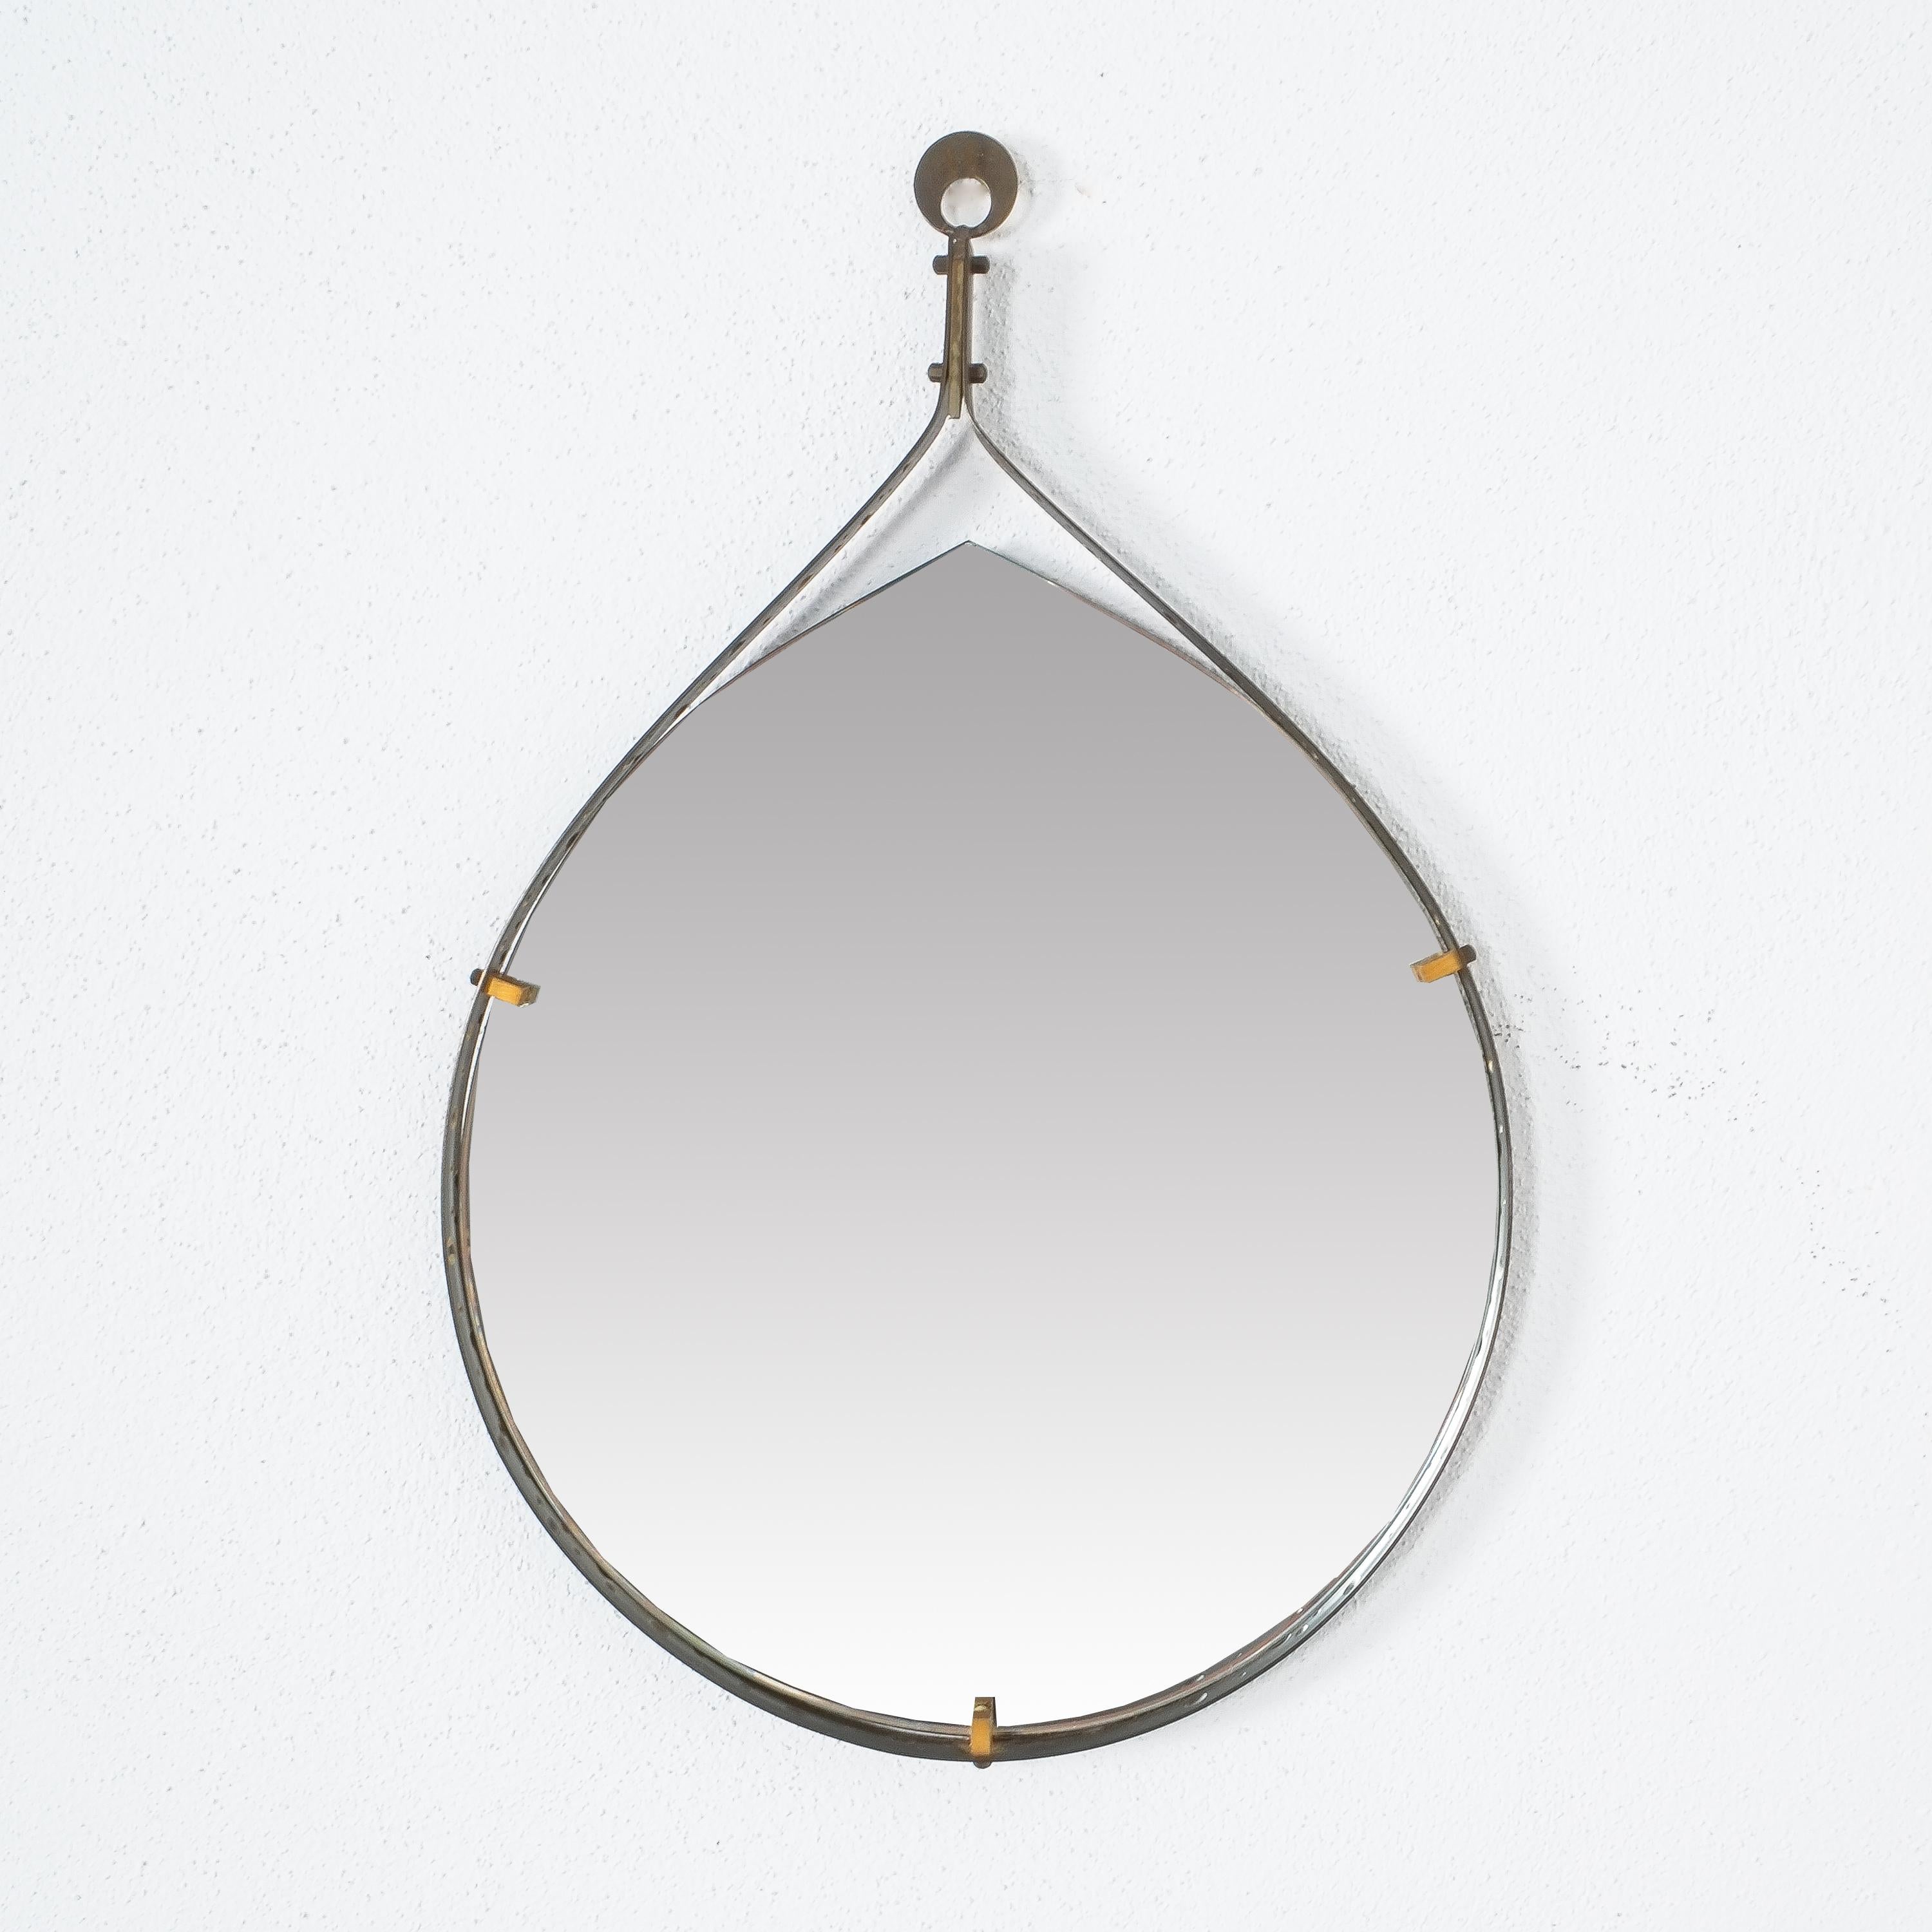 Teardrop iron mirror, Italy, circa 1955

1950s Italian iron and brass tear dropped shaped mirror with perforated brass detail within the edge.
Brass hardware. It’s in great condition, the mirror glass shows no staining or scratches.
Dimensions